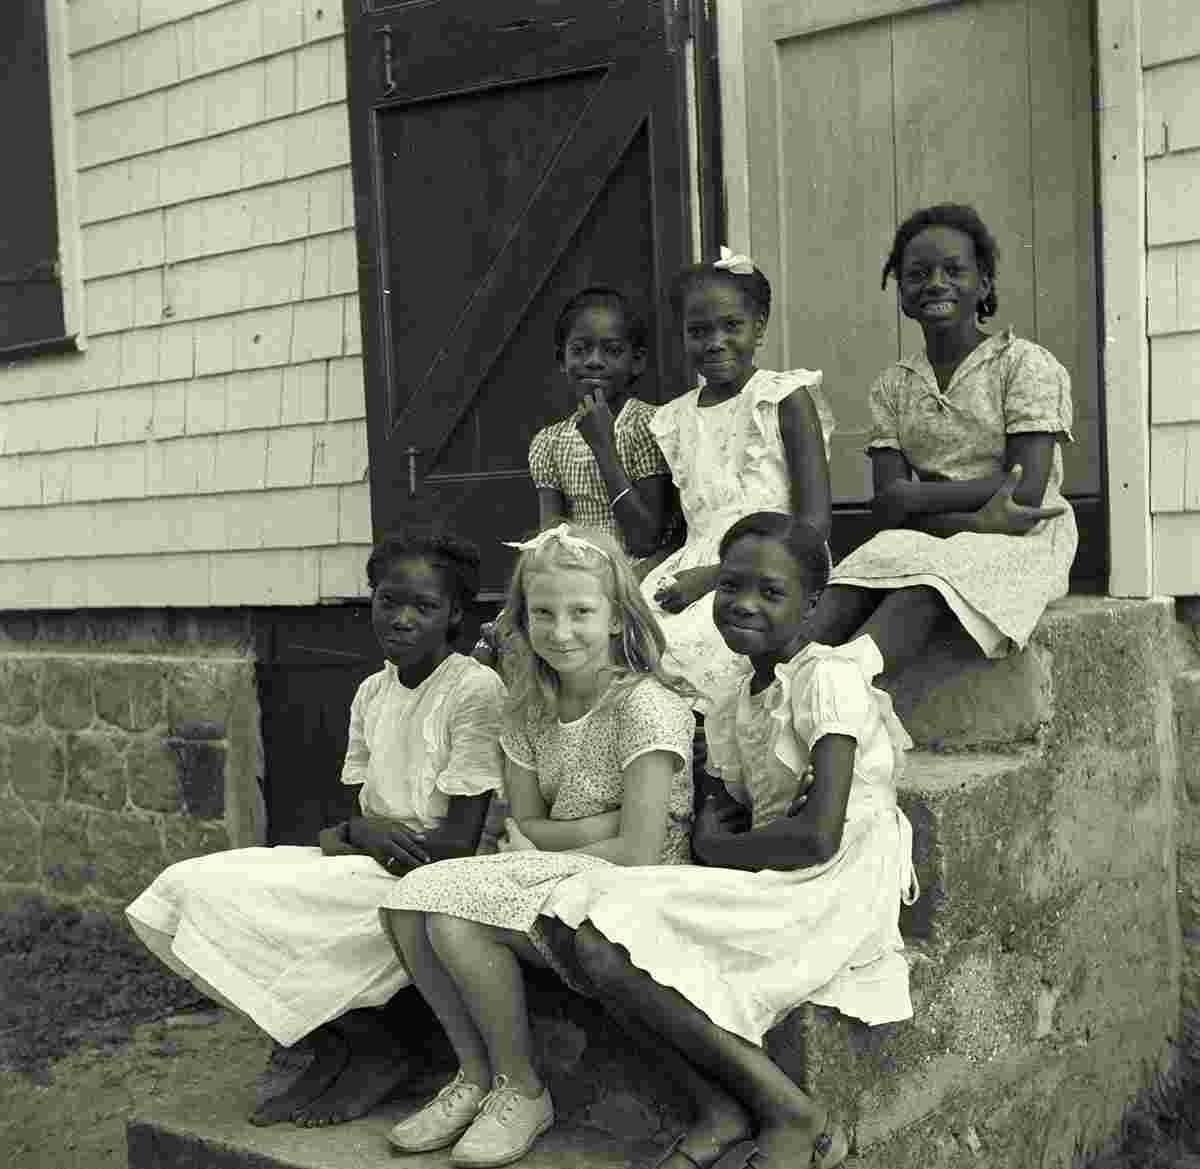 St. Johns. Girls on the steps of the school, 1947